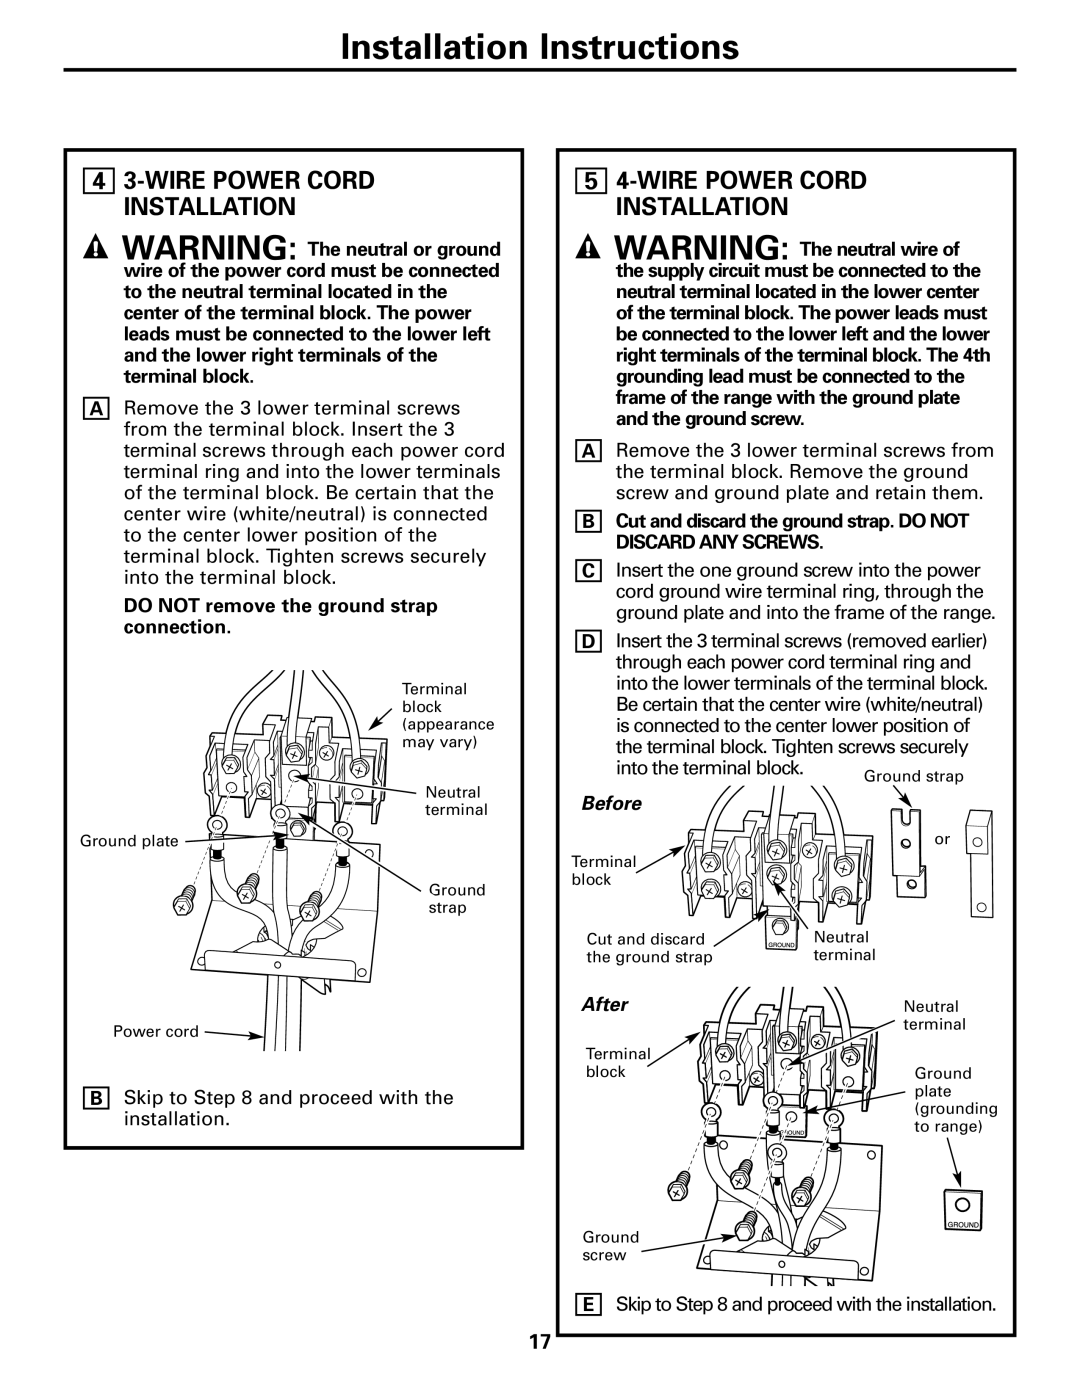 Hotpoint RA720, RA724 owner manual Wirepower Cord Installation, DO NOT remove the ground strap connection, Before, After 